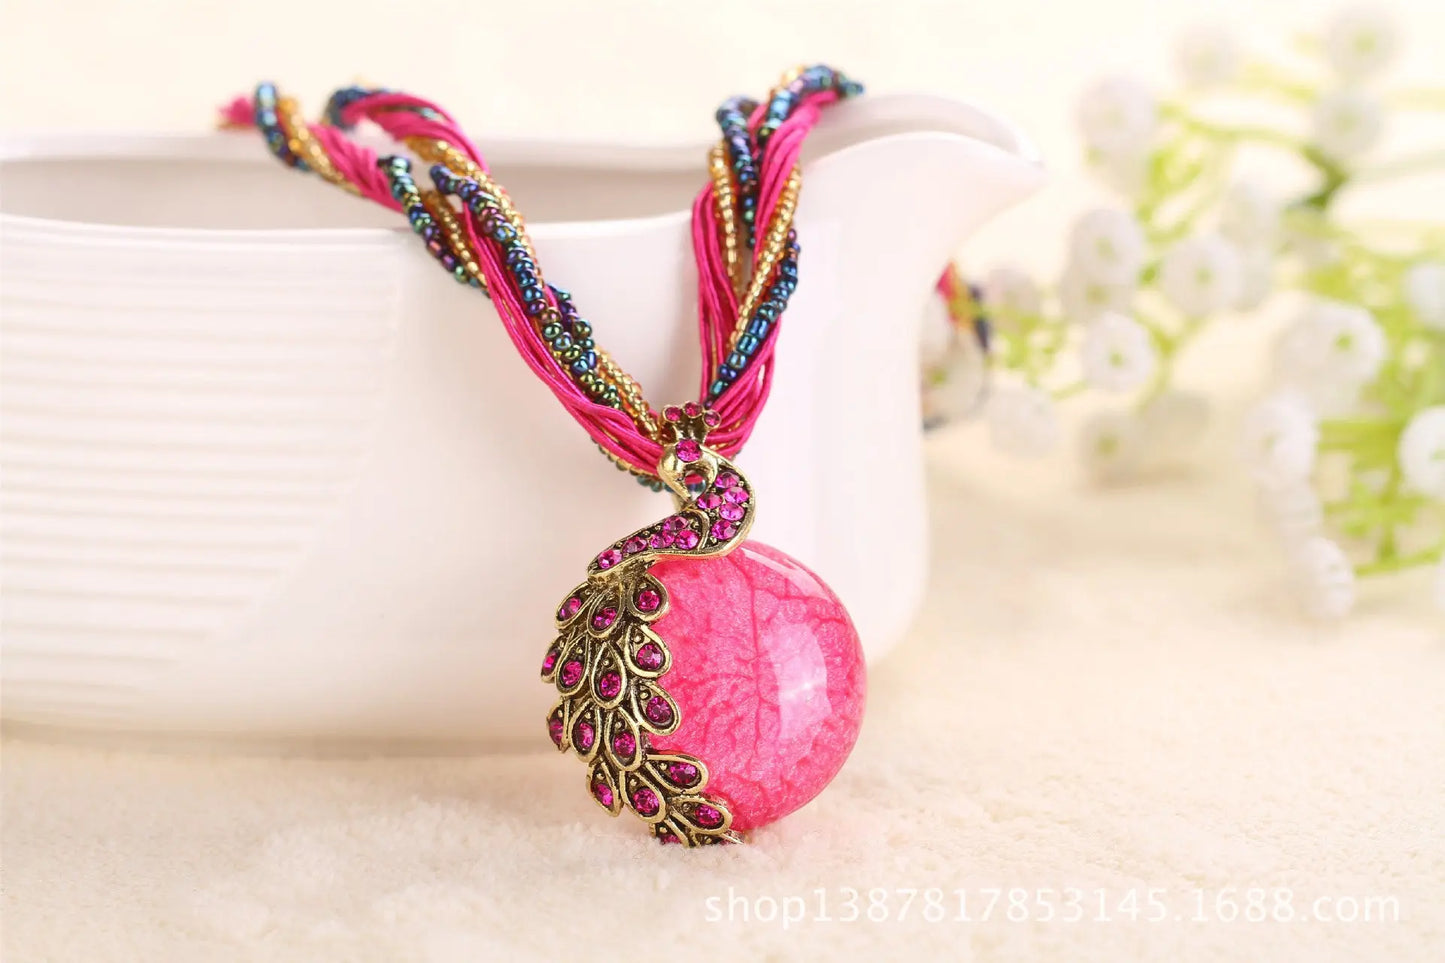 Boho Ethnic Jewelry Choker Handmade Pendant Necklace Natural Stone Bead Peacock Statement Maxi Necklace for Women Girls Gifts - Trending's Arena Beauty Boho Ethnic Jewelry Choker Handmade Pendant Necklace Natural Stone Bead Peacock Statement Maxi Necklace for Women Girls Gifts Electronics Facial & Neck pink